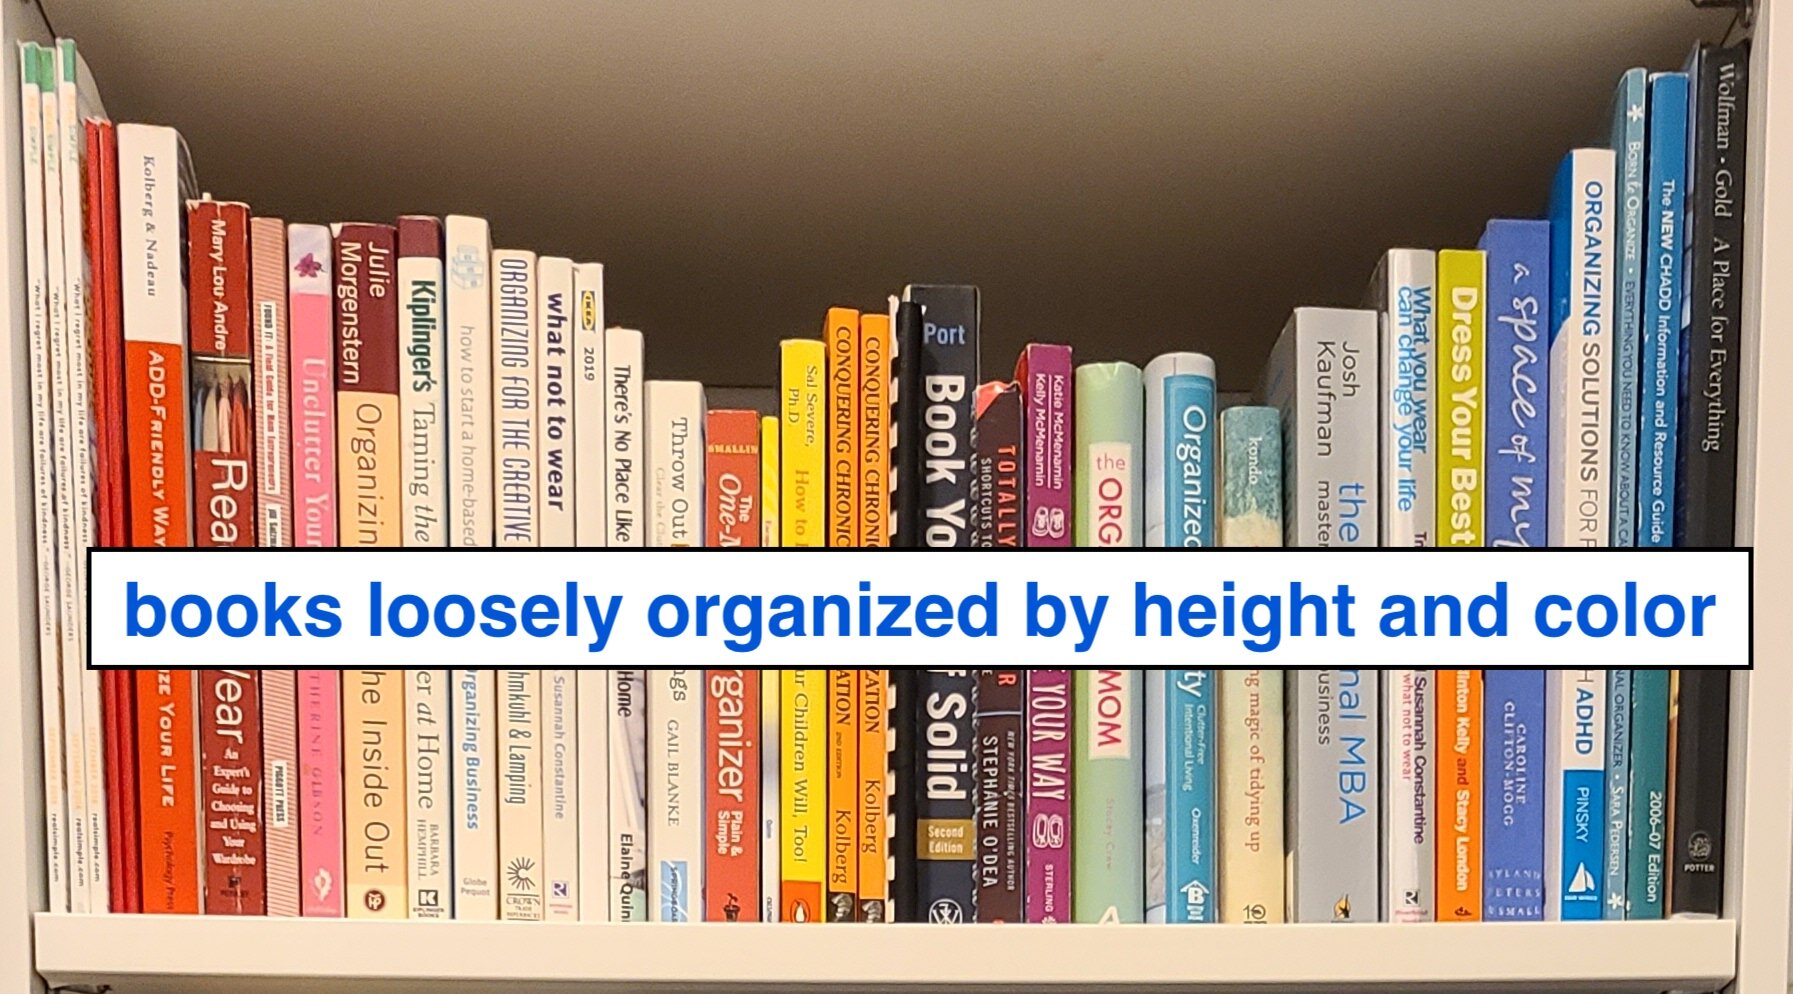 How To Organize Books In Your Home